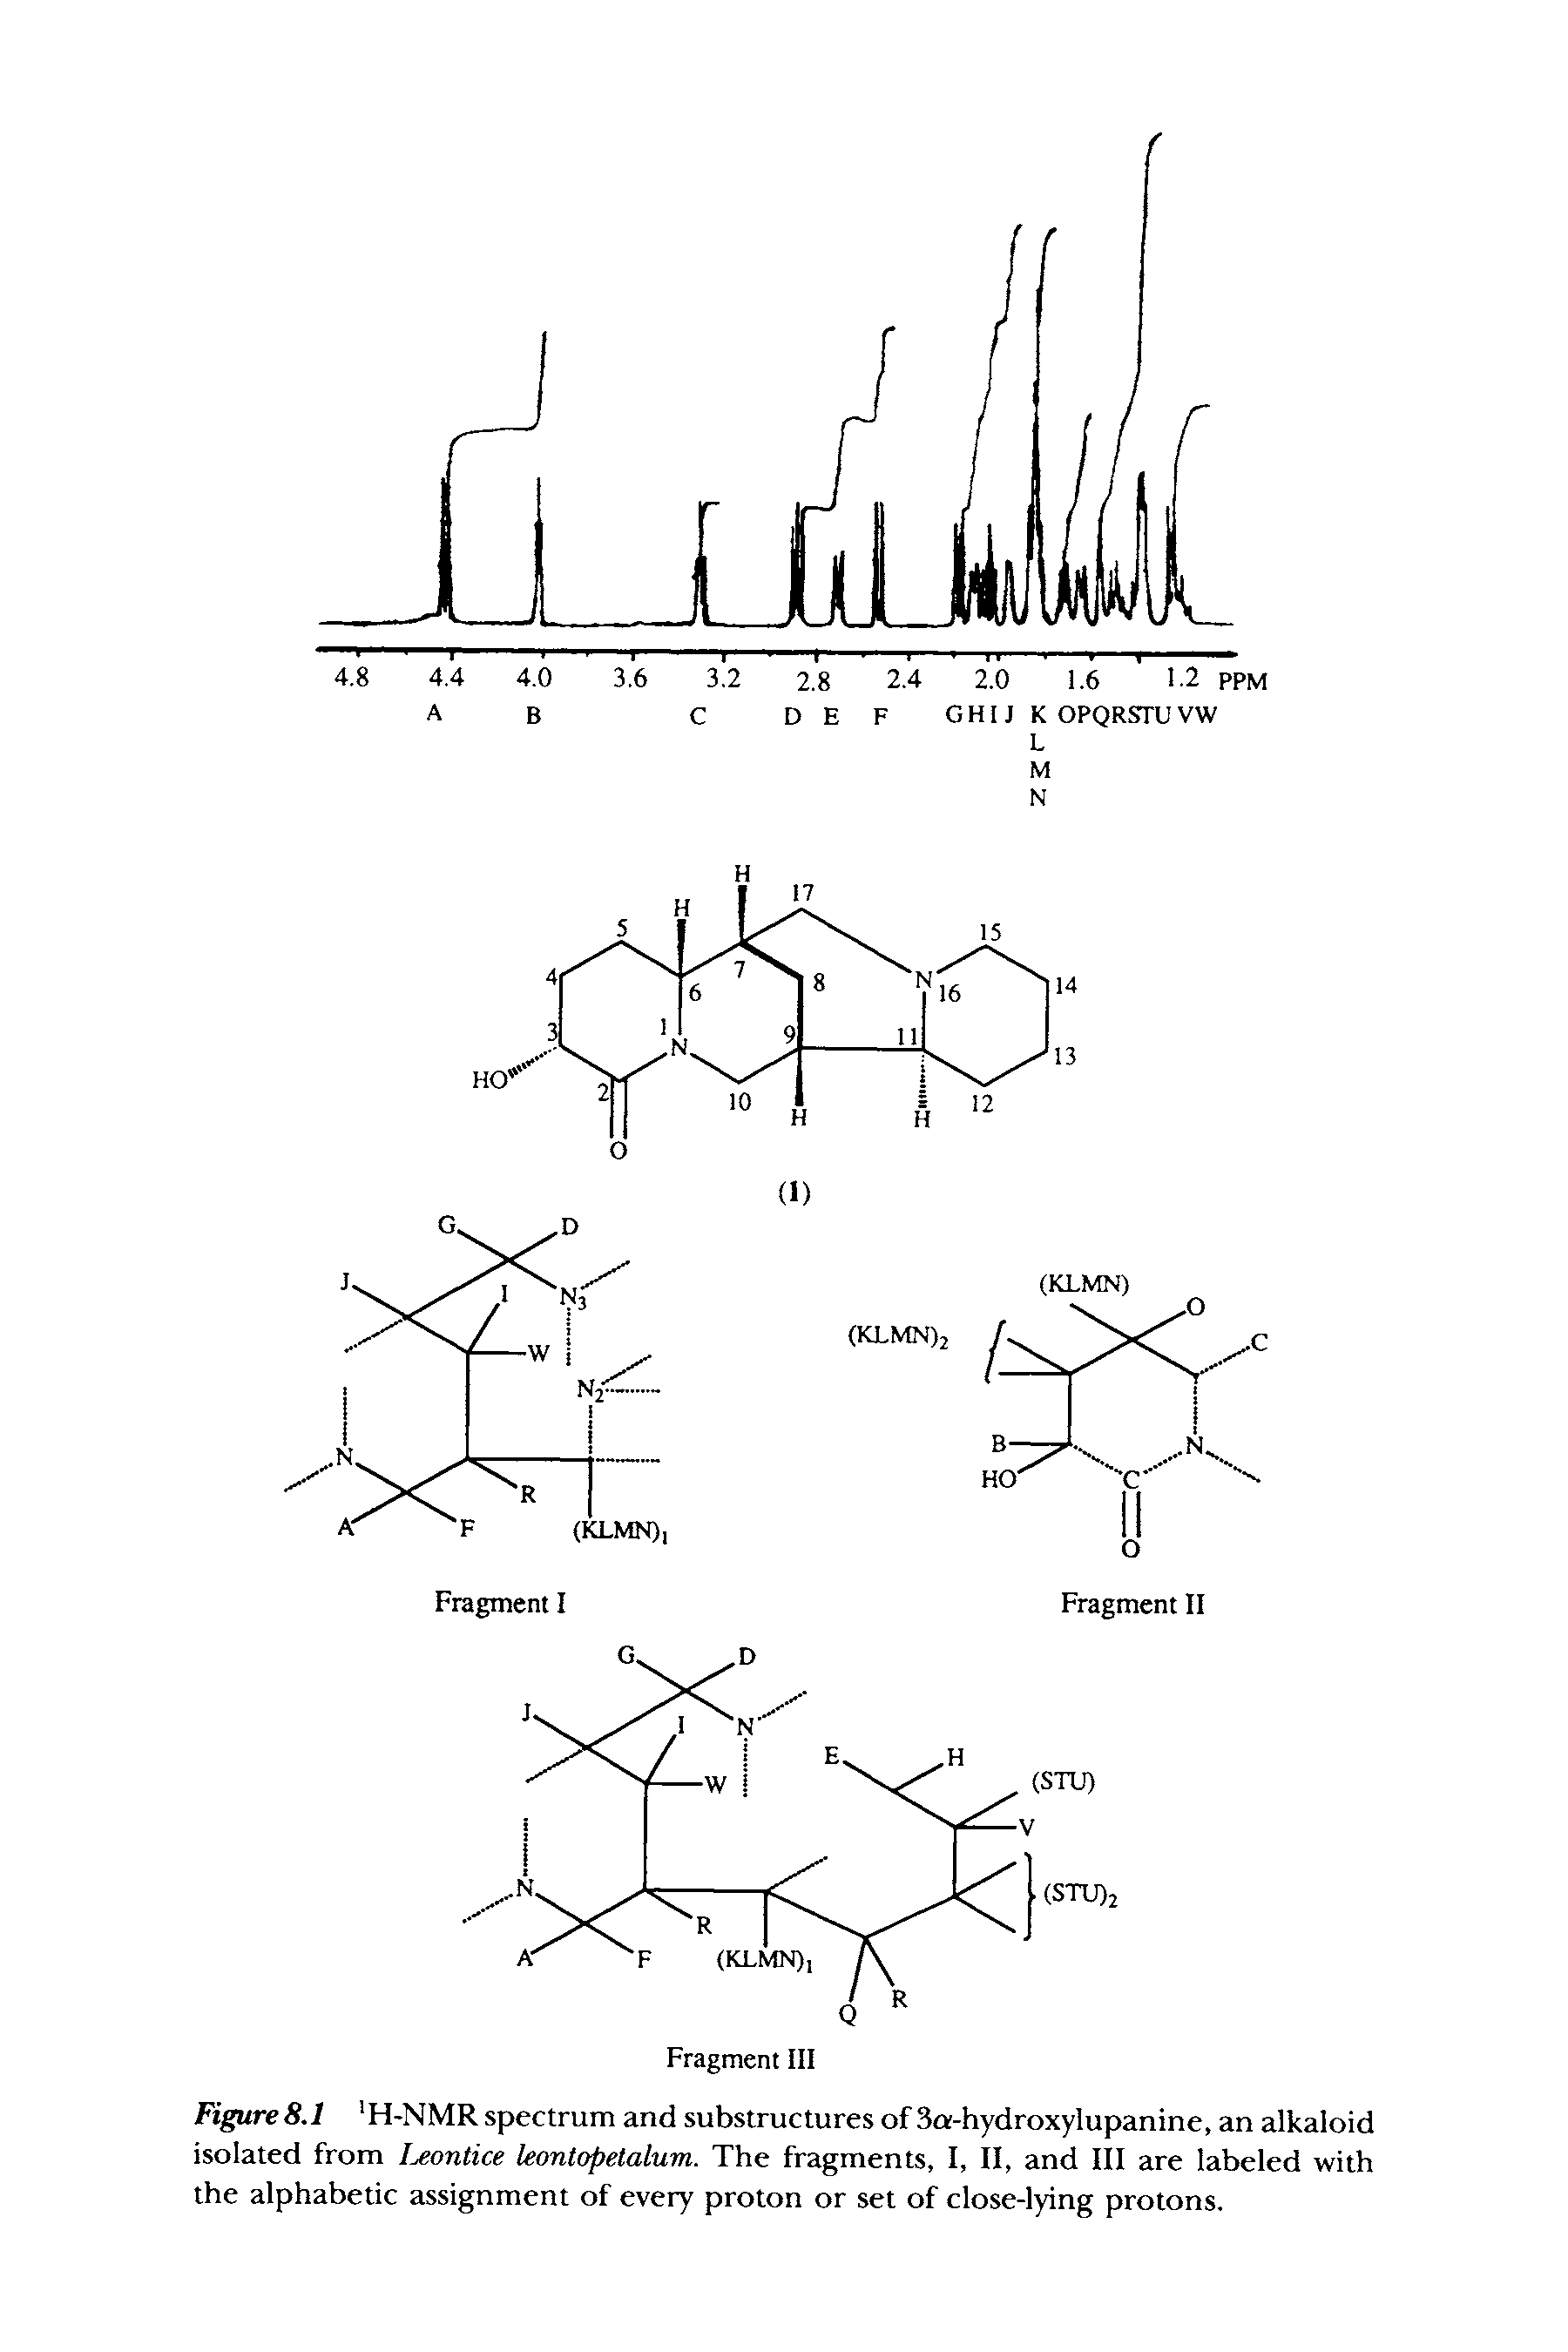 Figure 8.1 H-NMR spectrum and substructures of 3a-hydroxylupanine, an alkaloid isolated from I ontice leontopetalum. The fragments, I, II, and III are labeled with the alphabetic assignment of every proton or set of close-lying protons.